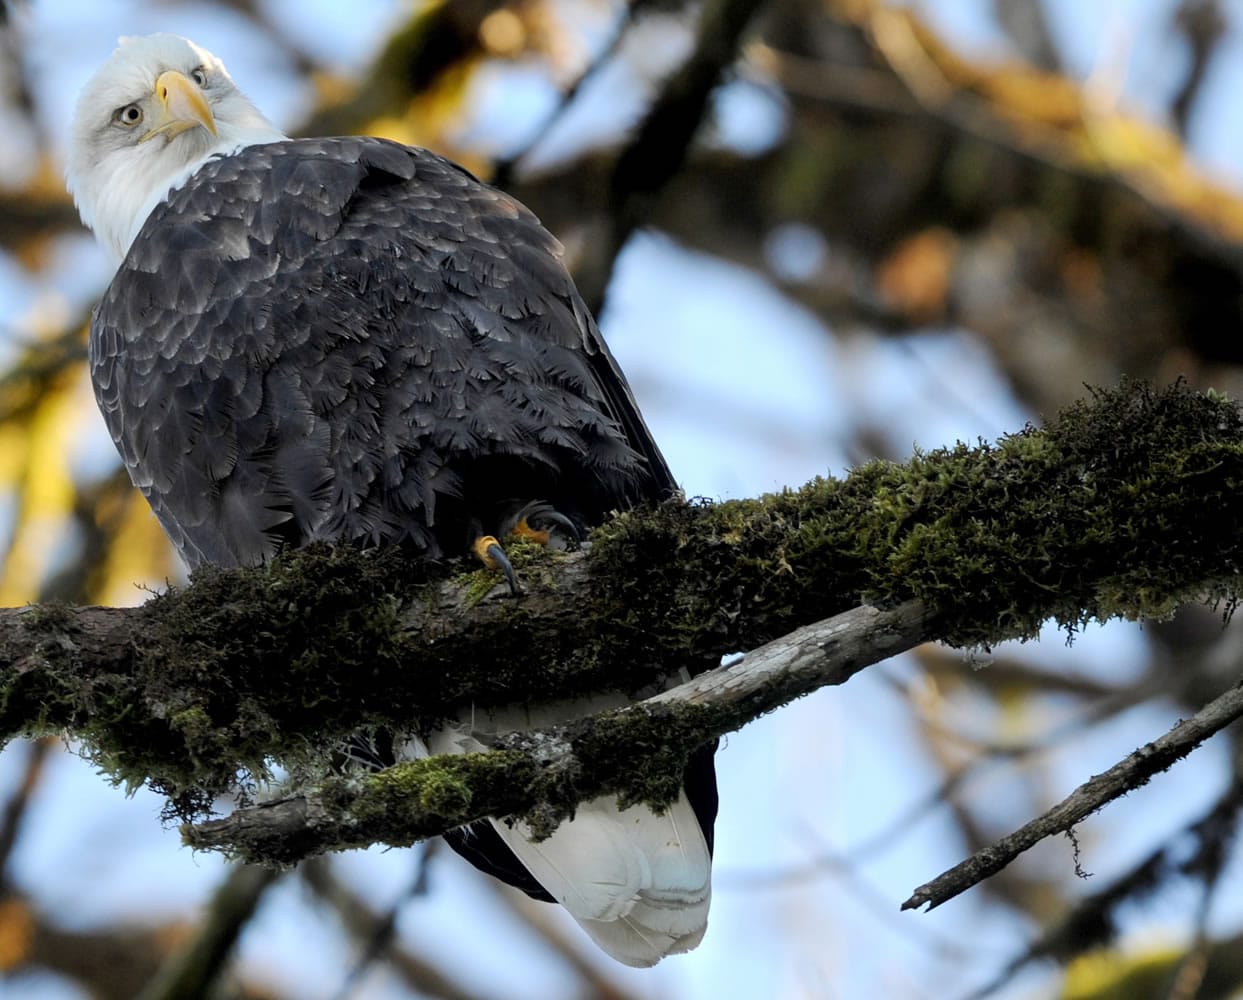 A bald eagle rests in a tree above the Skagit River looking for a meal near Concrete.